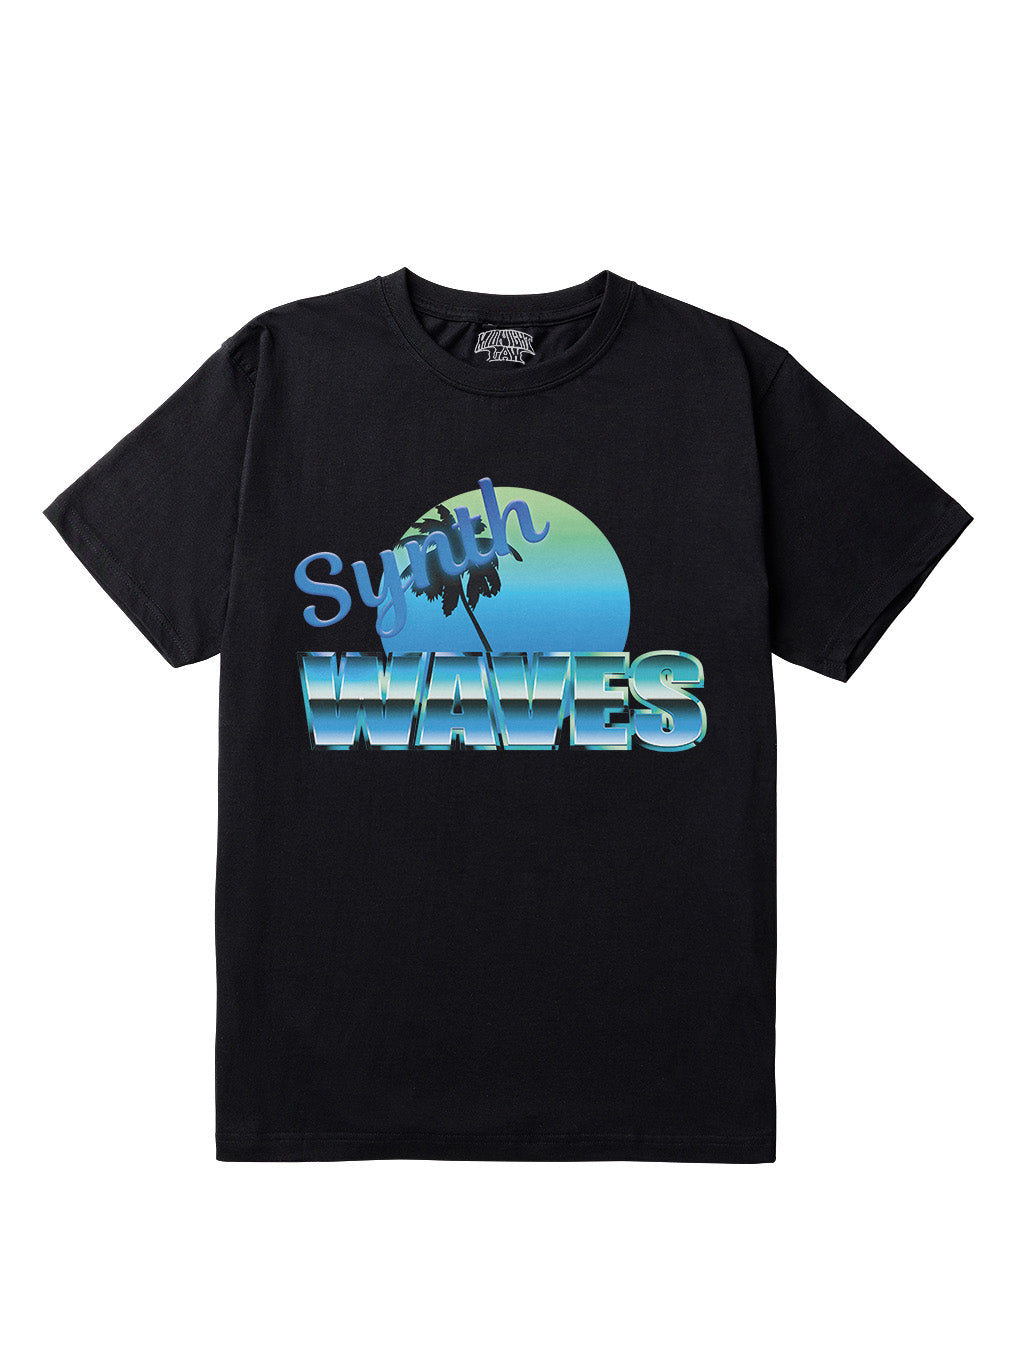 Synthwaves T-Shirt